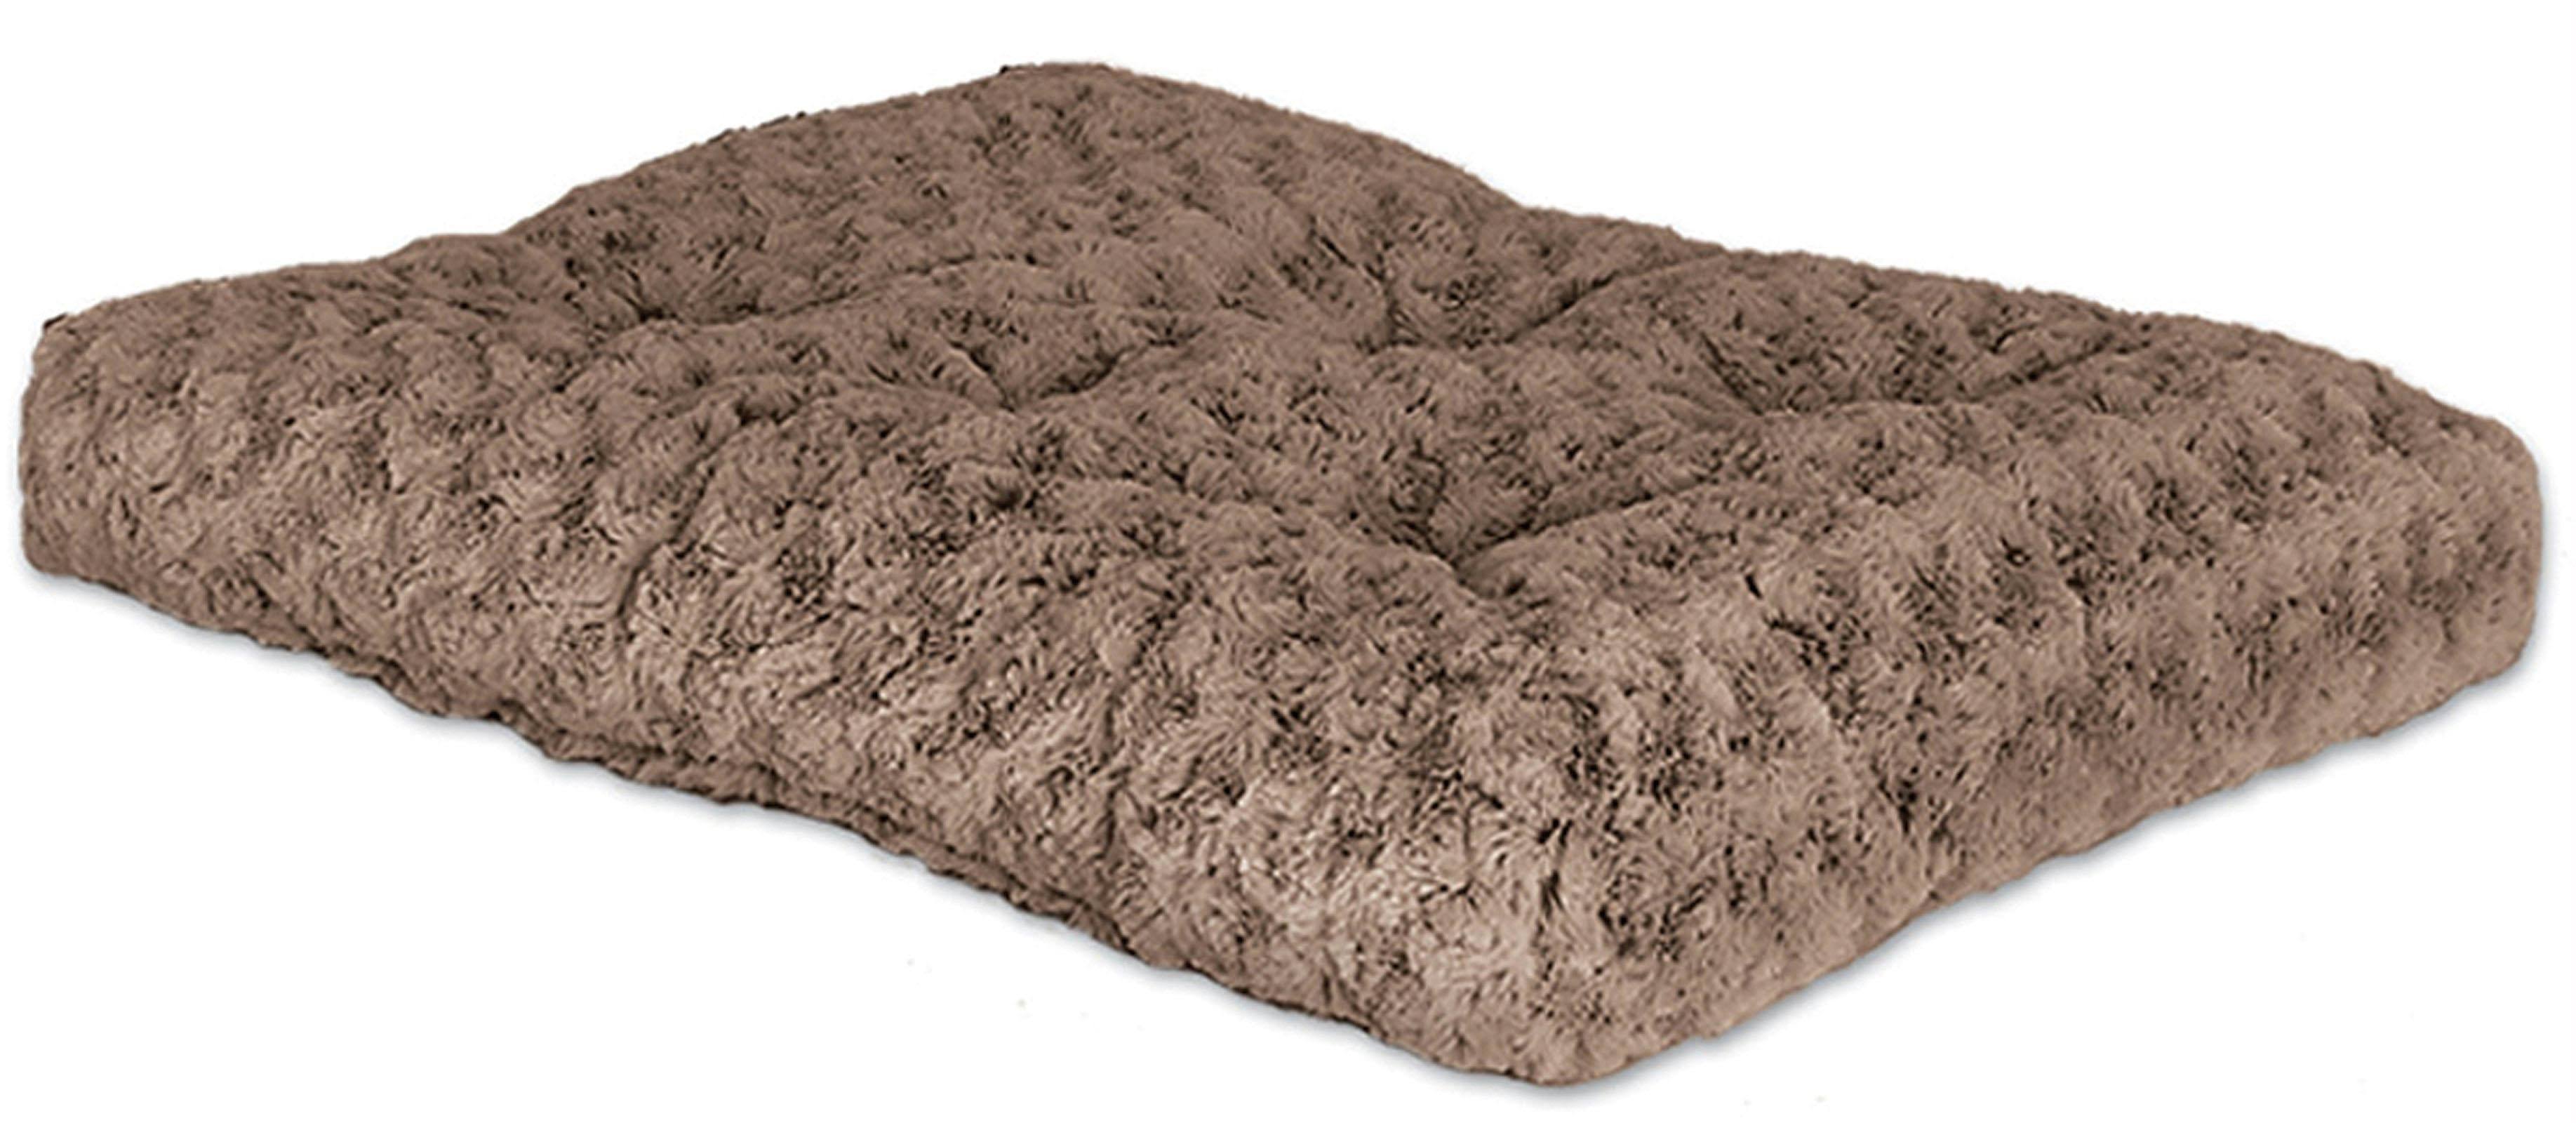 MidWest Quiet Time Deluxe Mocha Ombre Swirl Pet Bed, Brown/Mocha